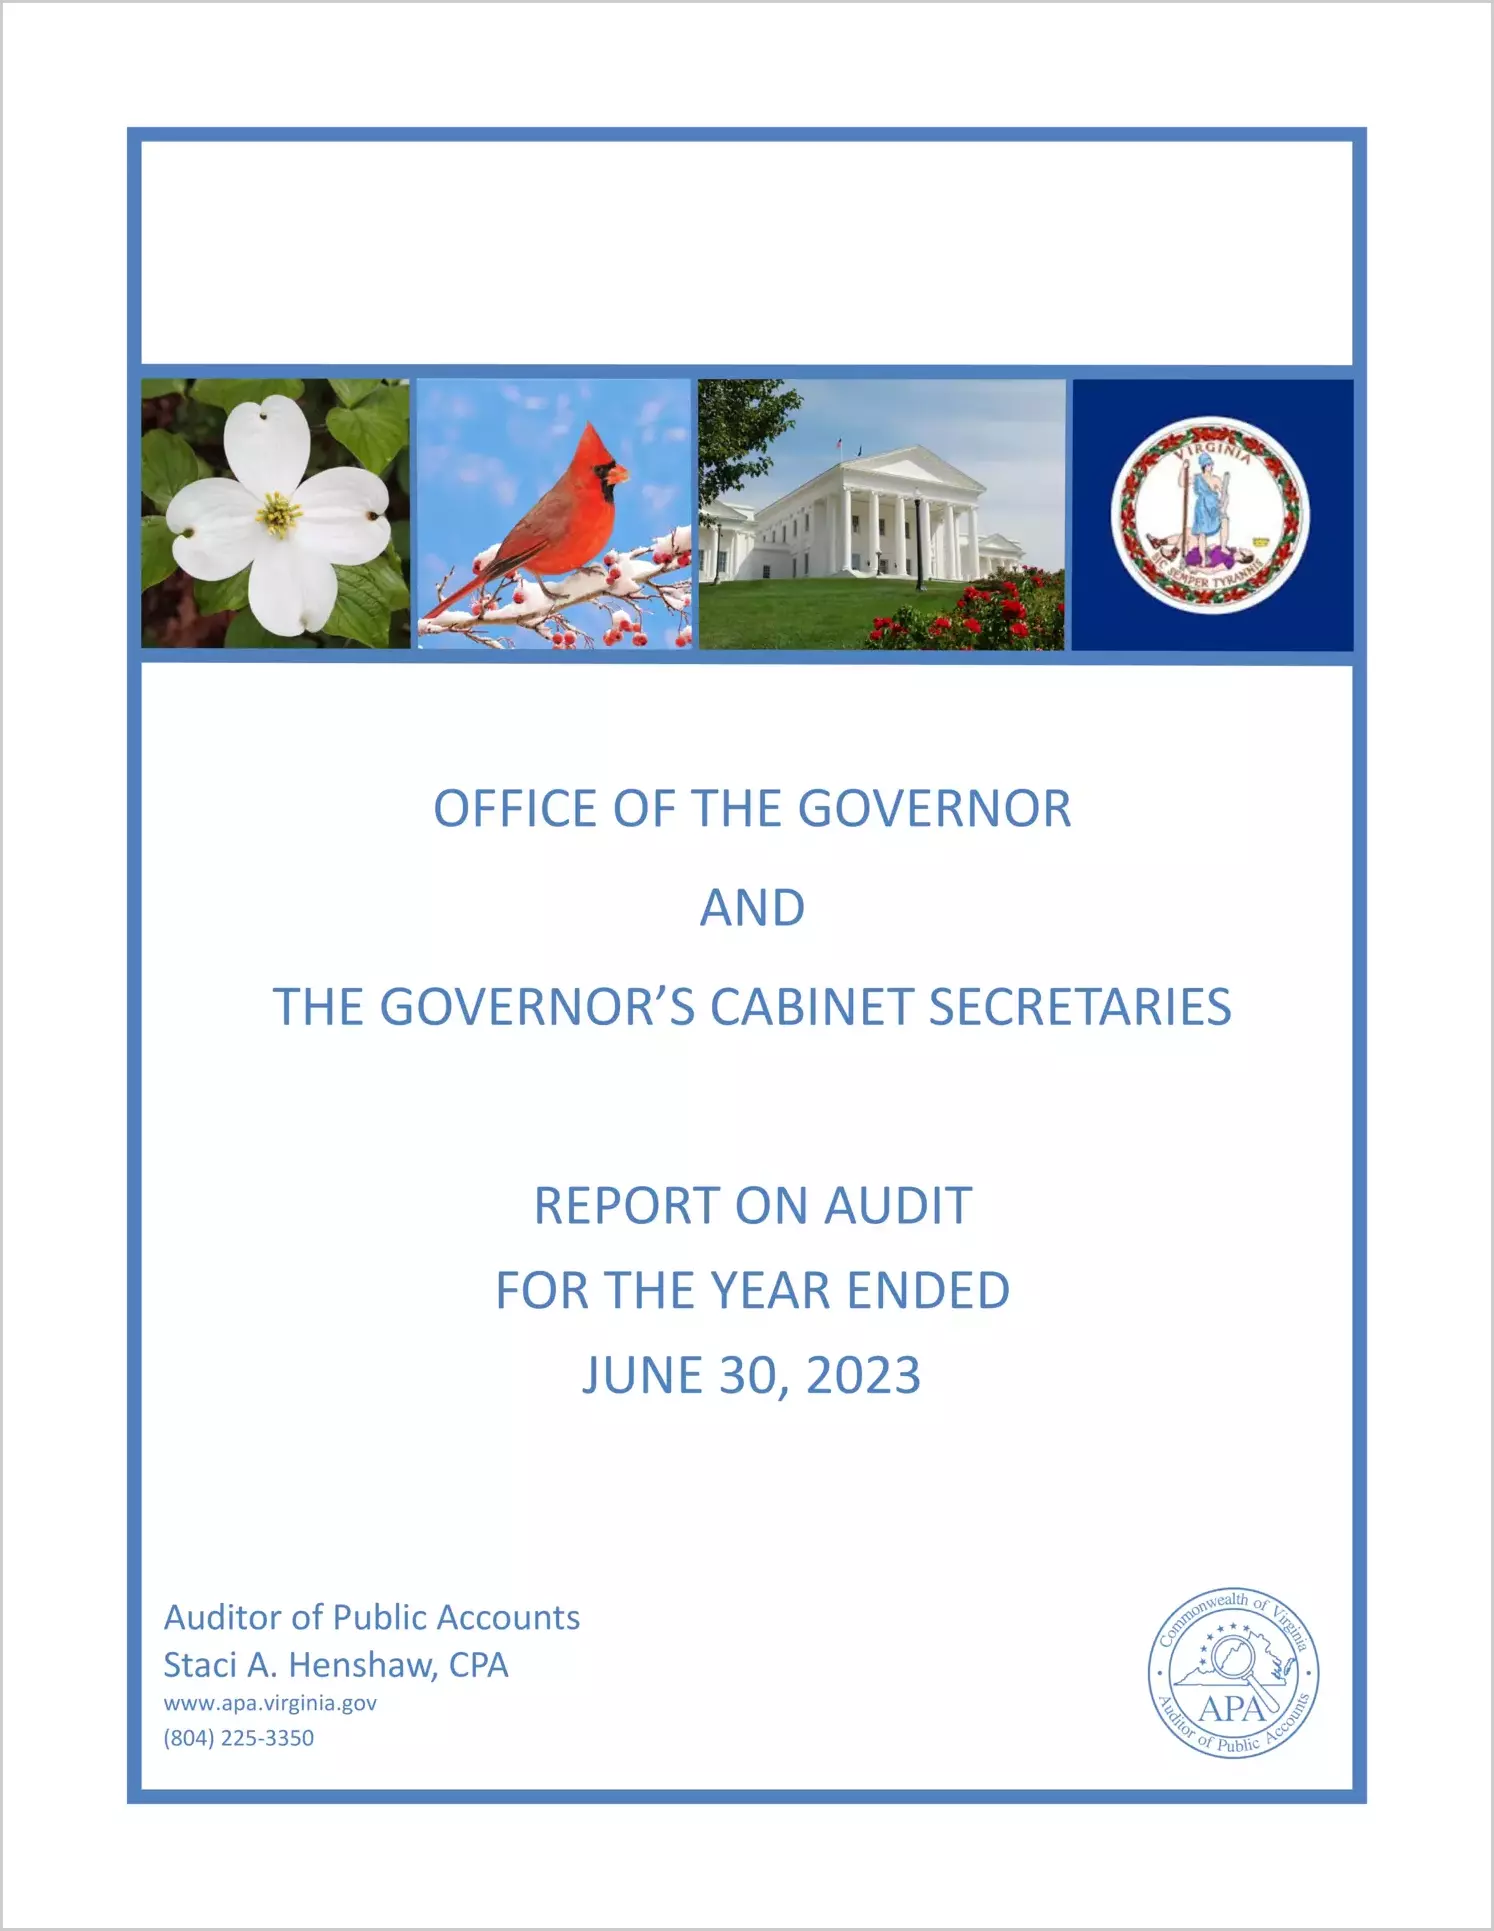 Office of the Govenor and the Governor's Cabinet Secretaries for the year ended June 30, 2023